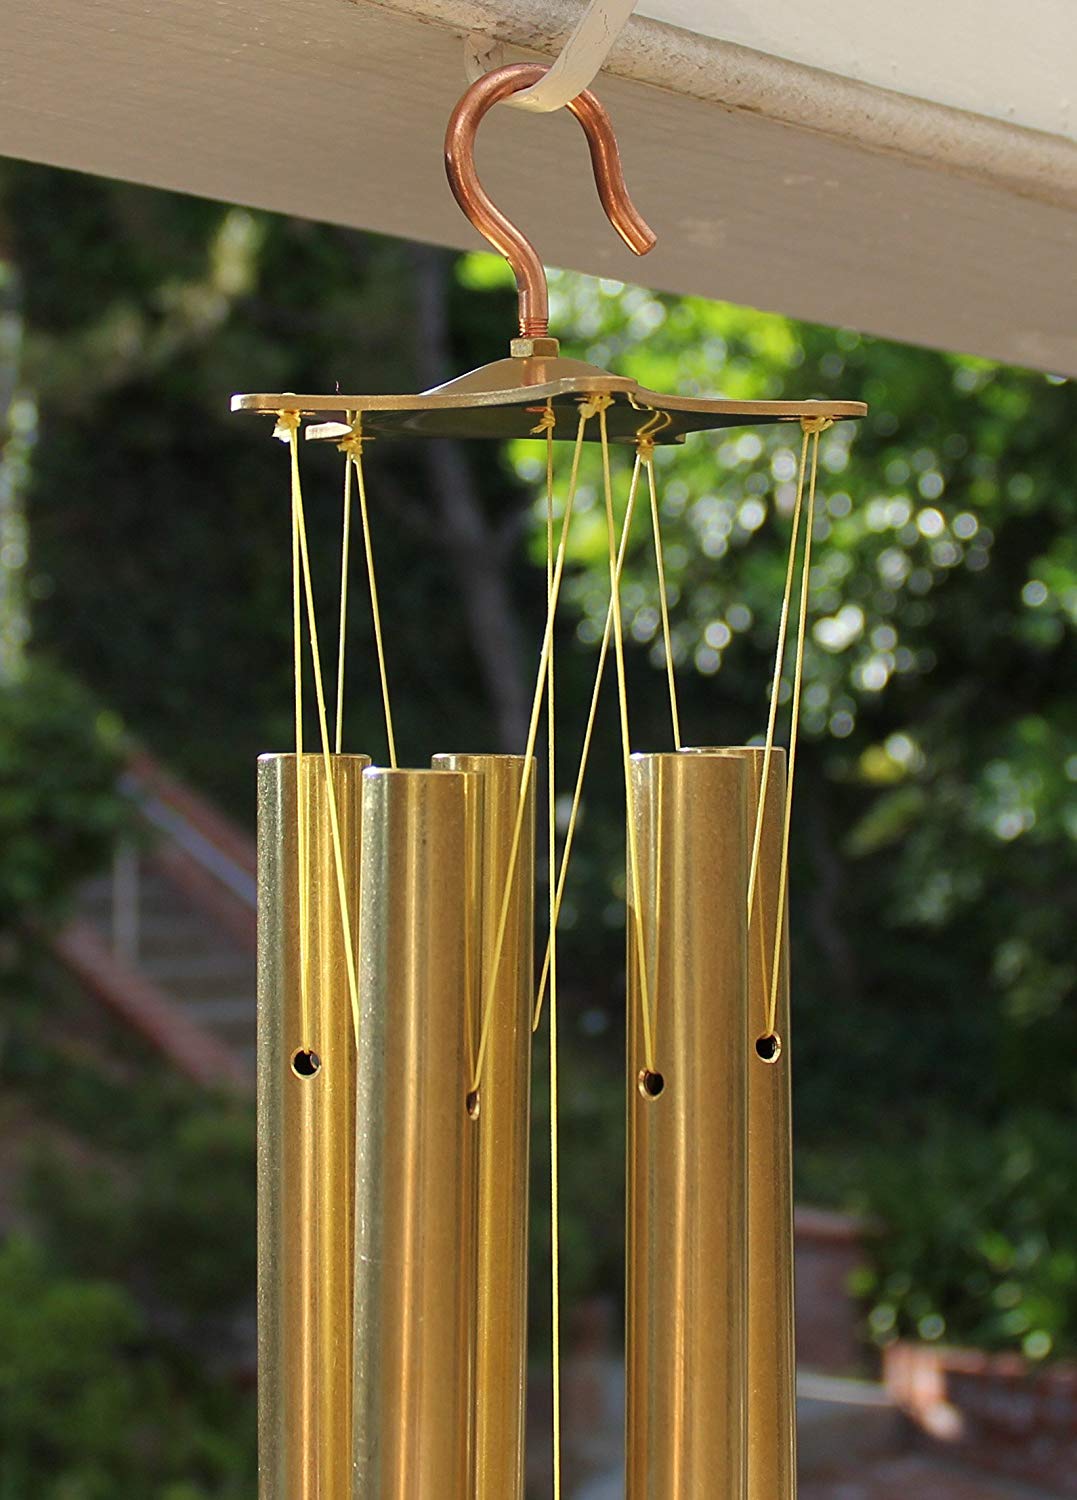 Stanwood Wind Sculpture - Brass and Copper Wind Chime